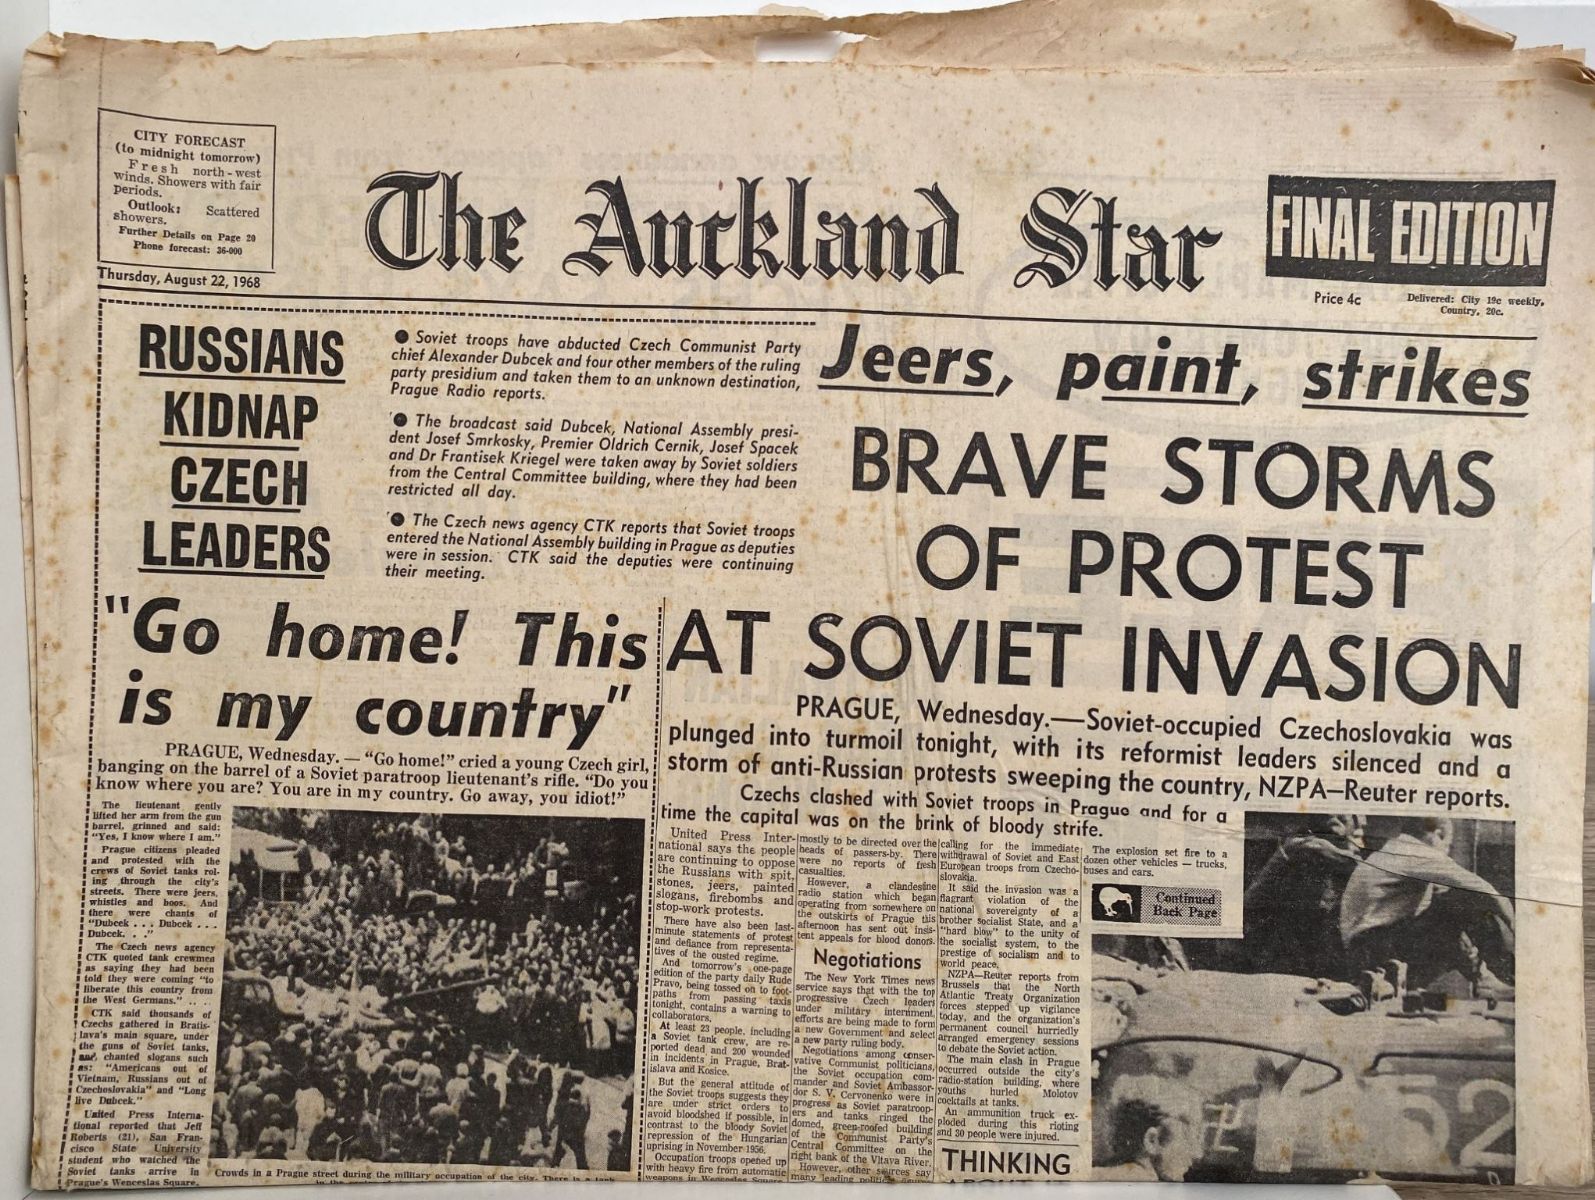 OLD NEWSPAPER: The Auckland Star, 22 August 1978 - Russia invades Czechoslovakia